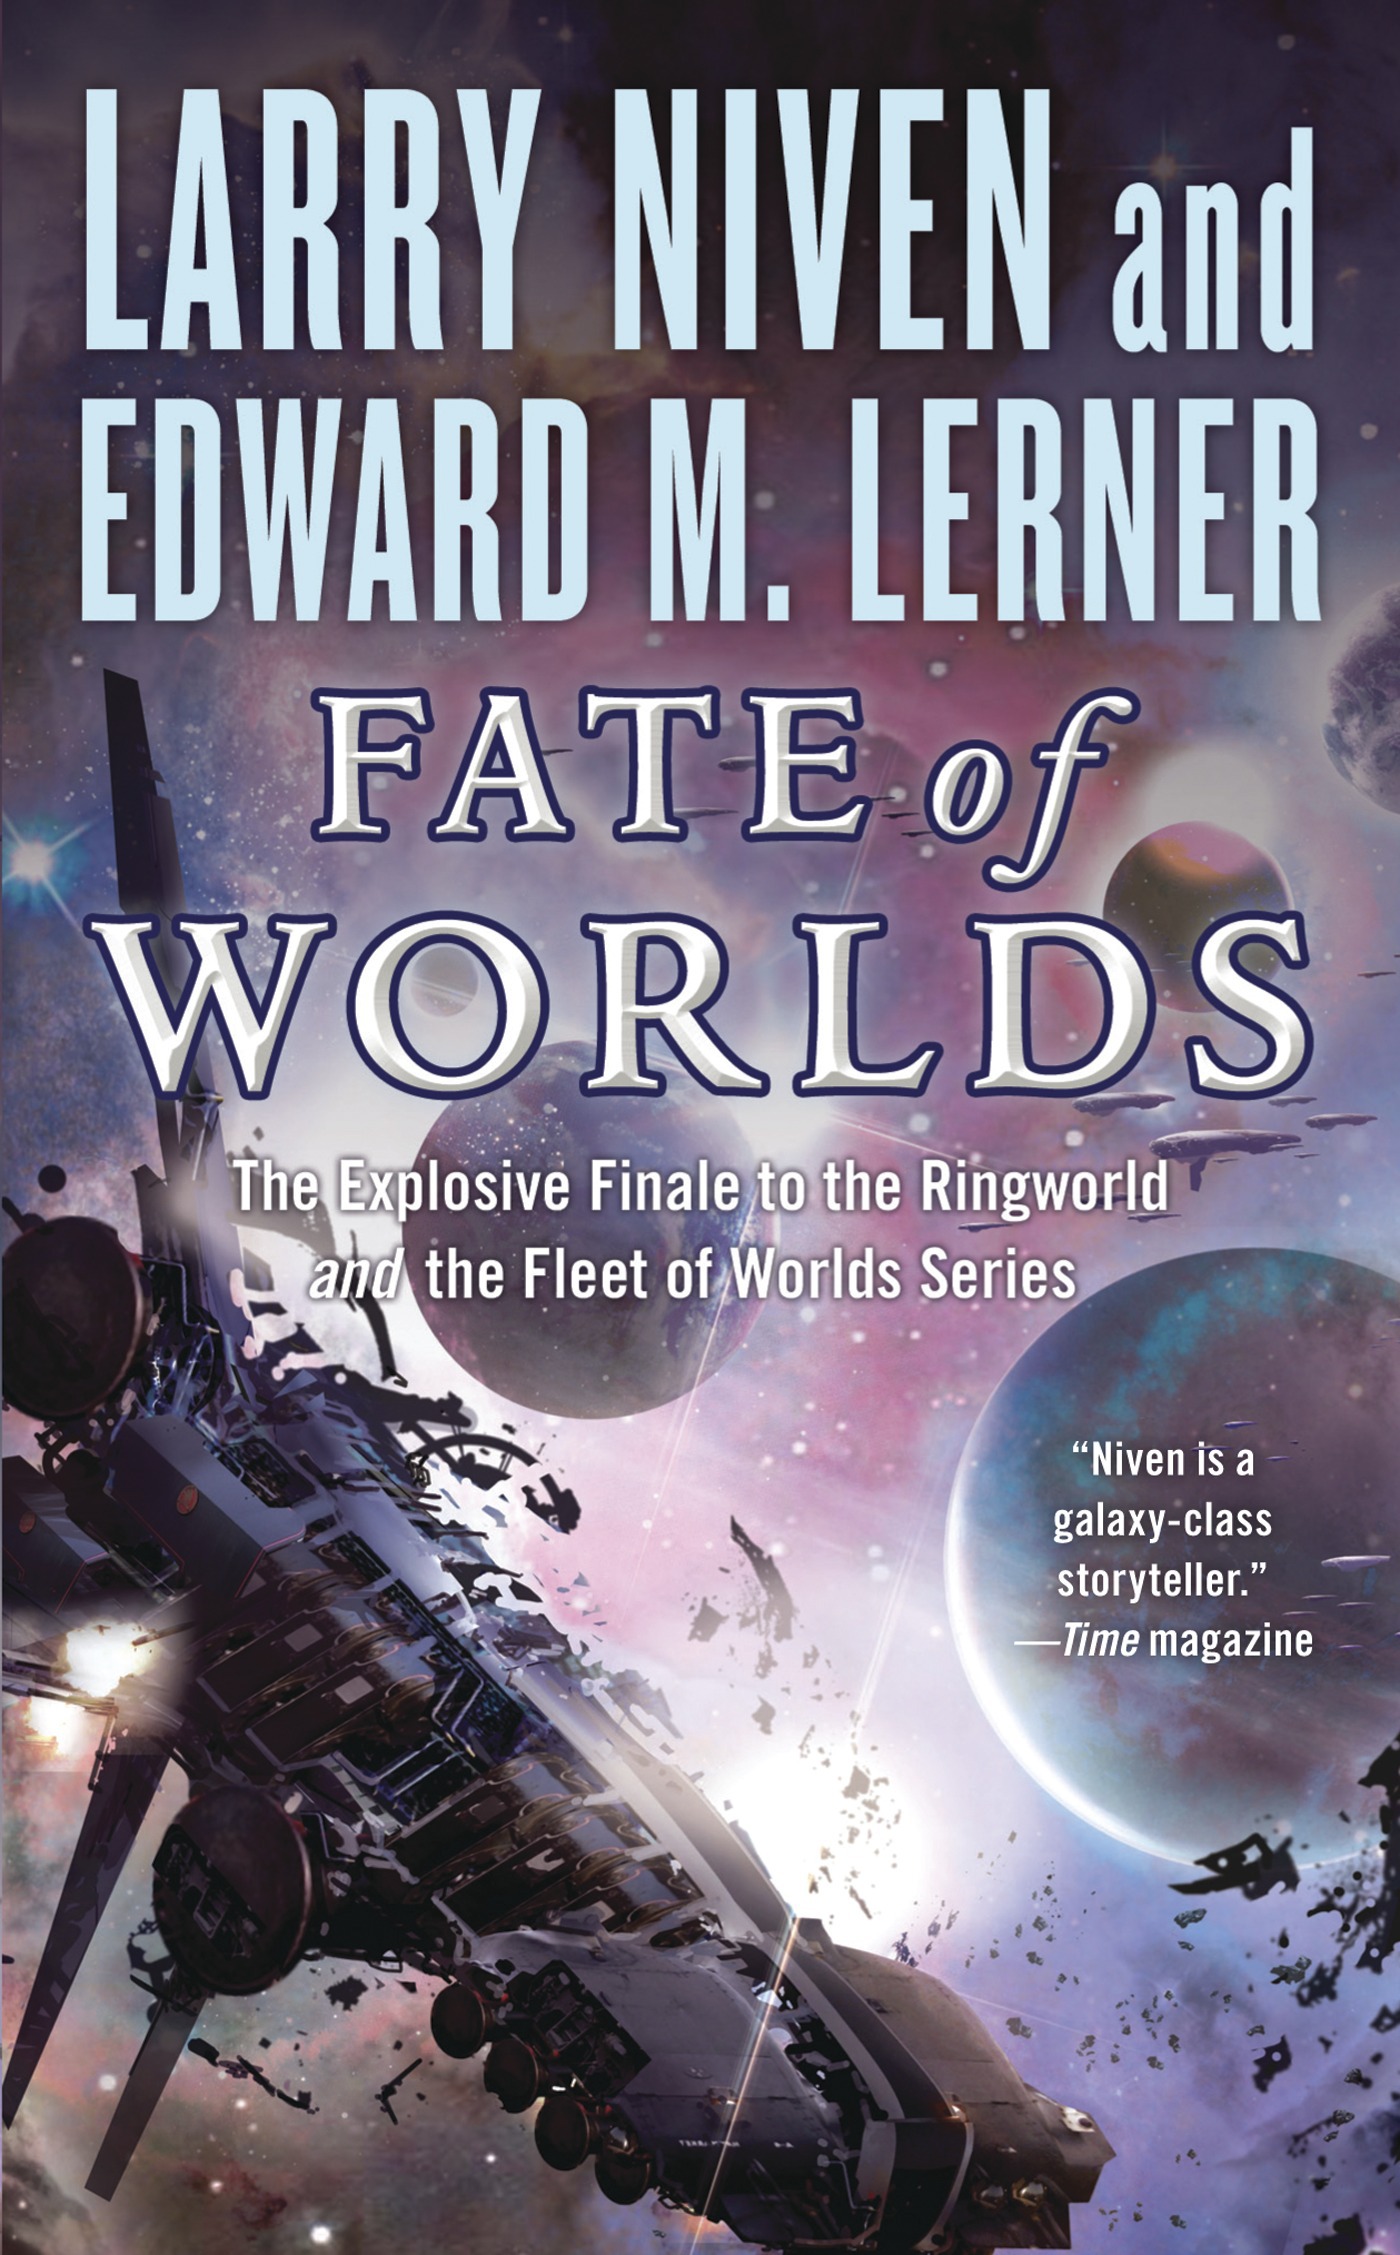 Fate of Worlds : Return from the Ringworld by Larry Niven, Edward M. Lerner